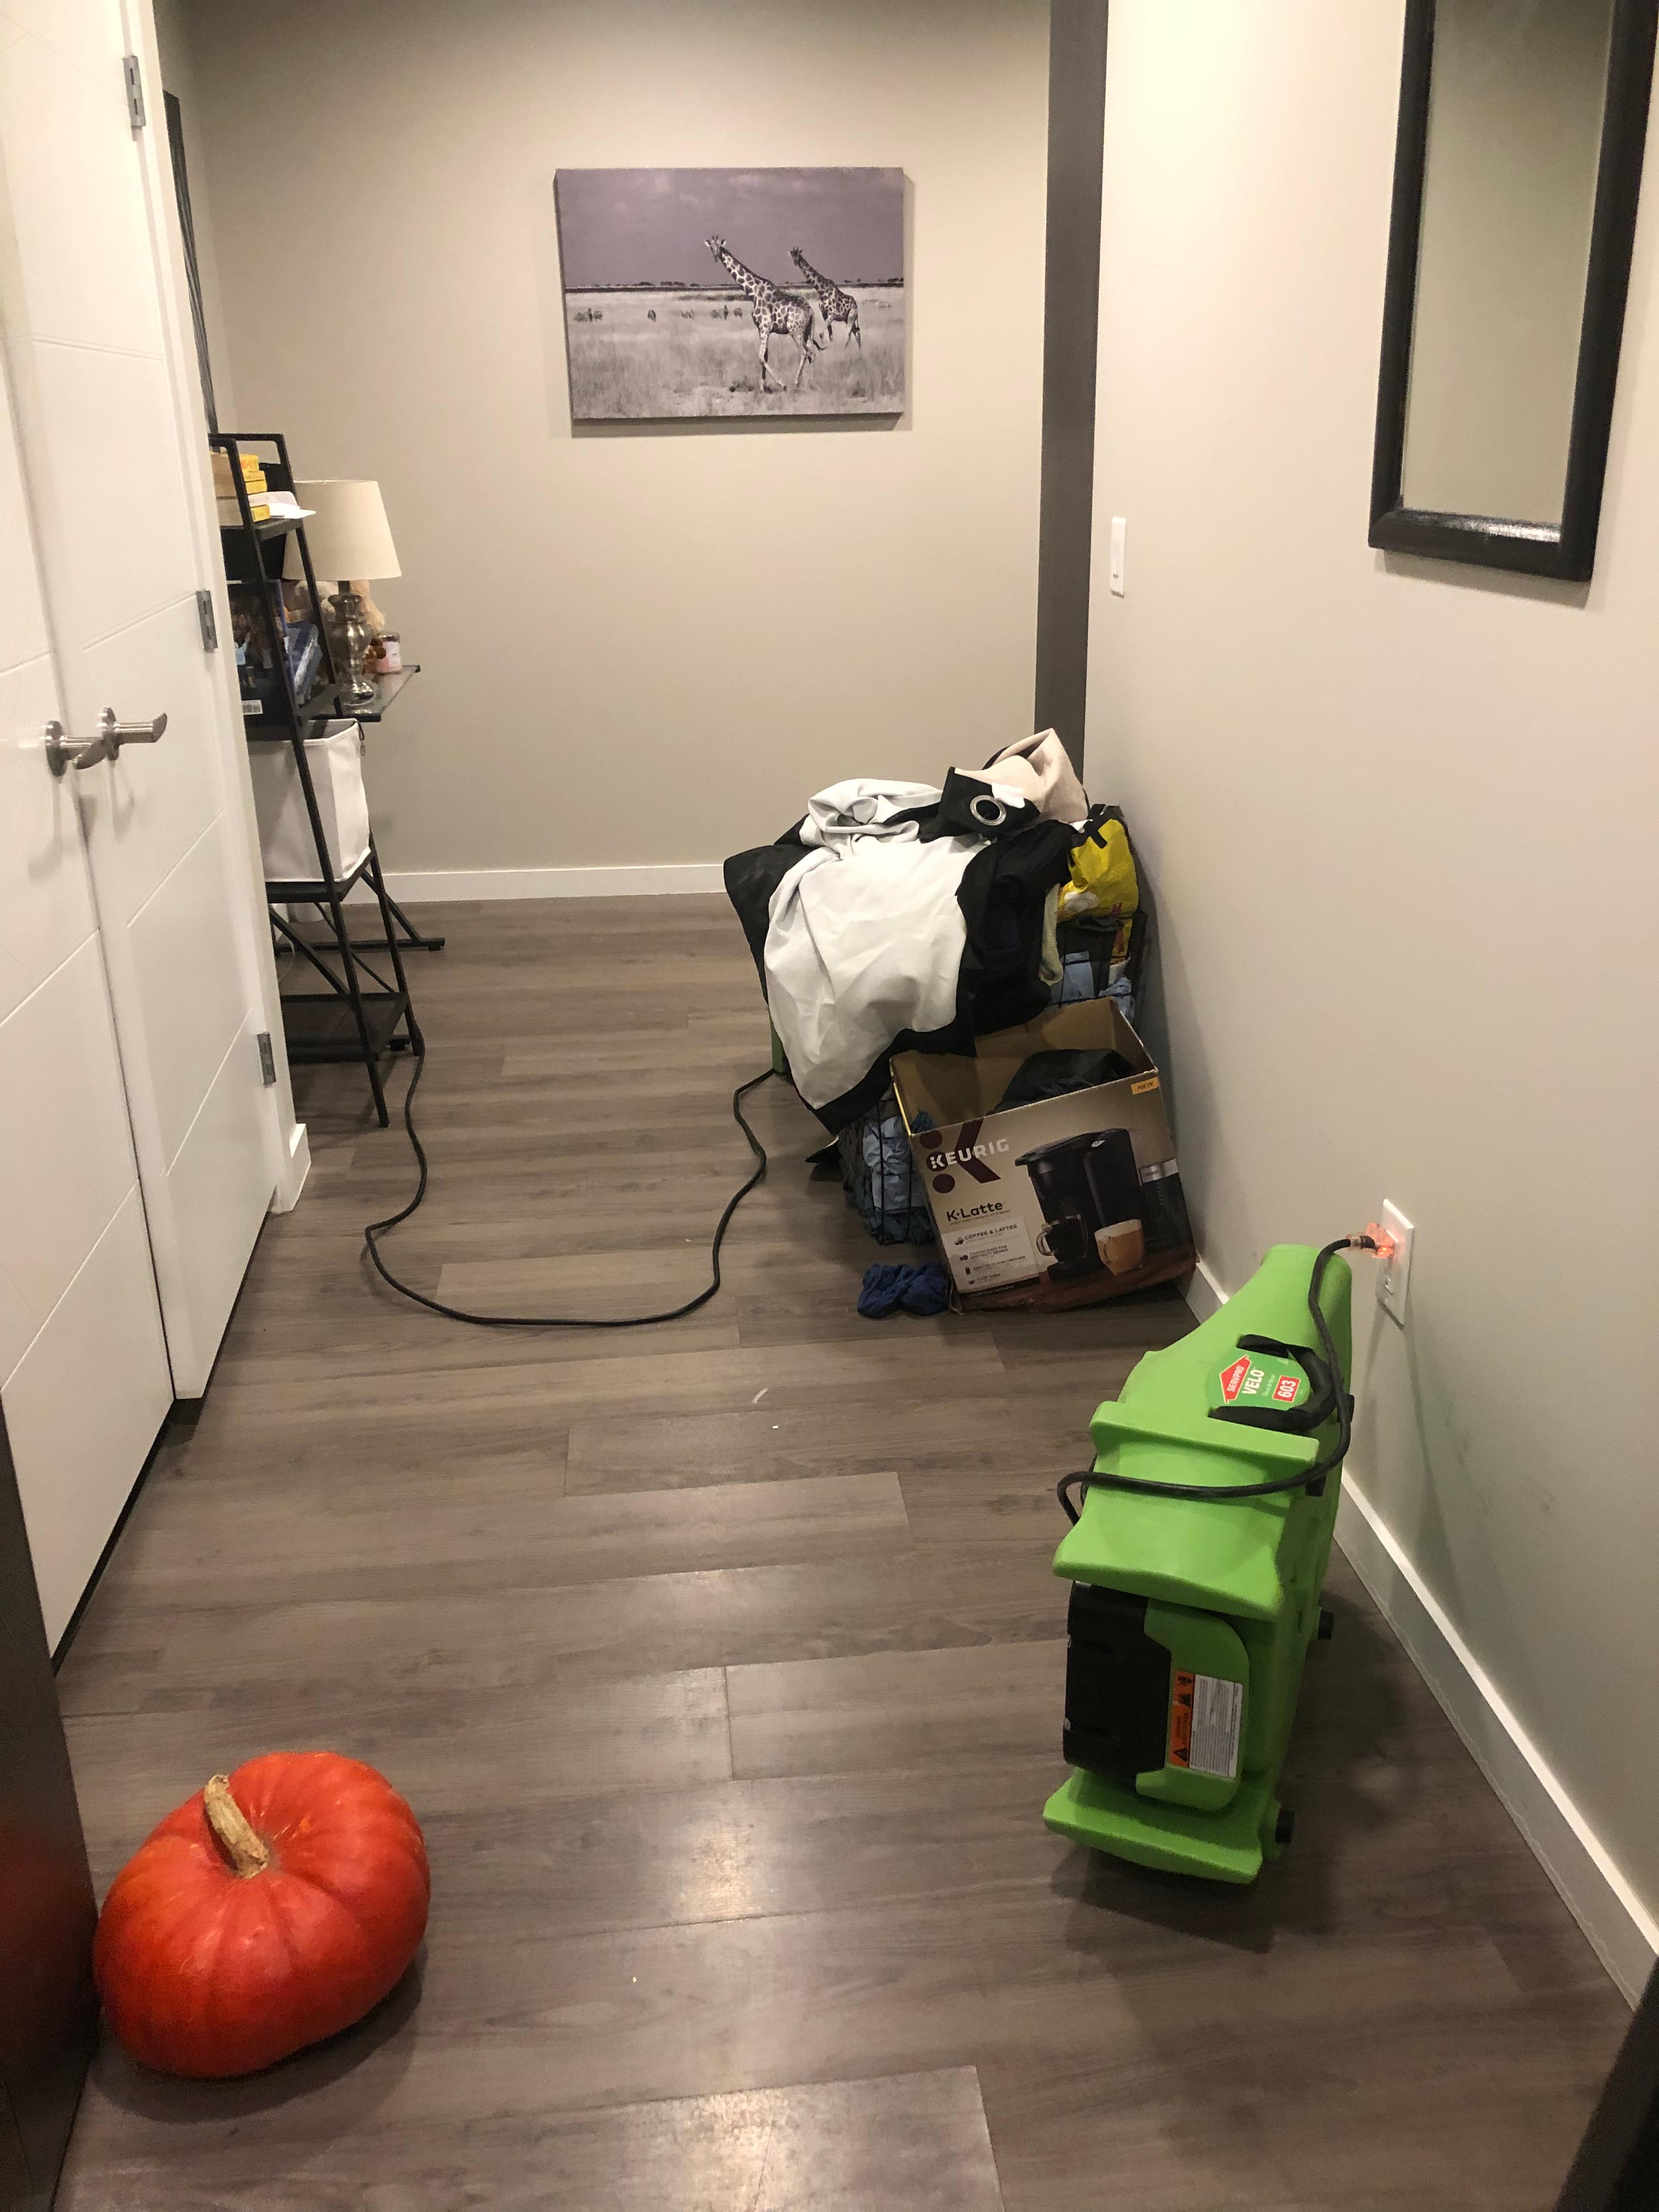 This homeowner gave our team at SERVPRO of Shoreline/Woodinville a call at the first sign of water damage.